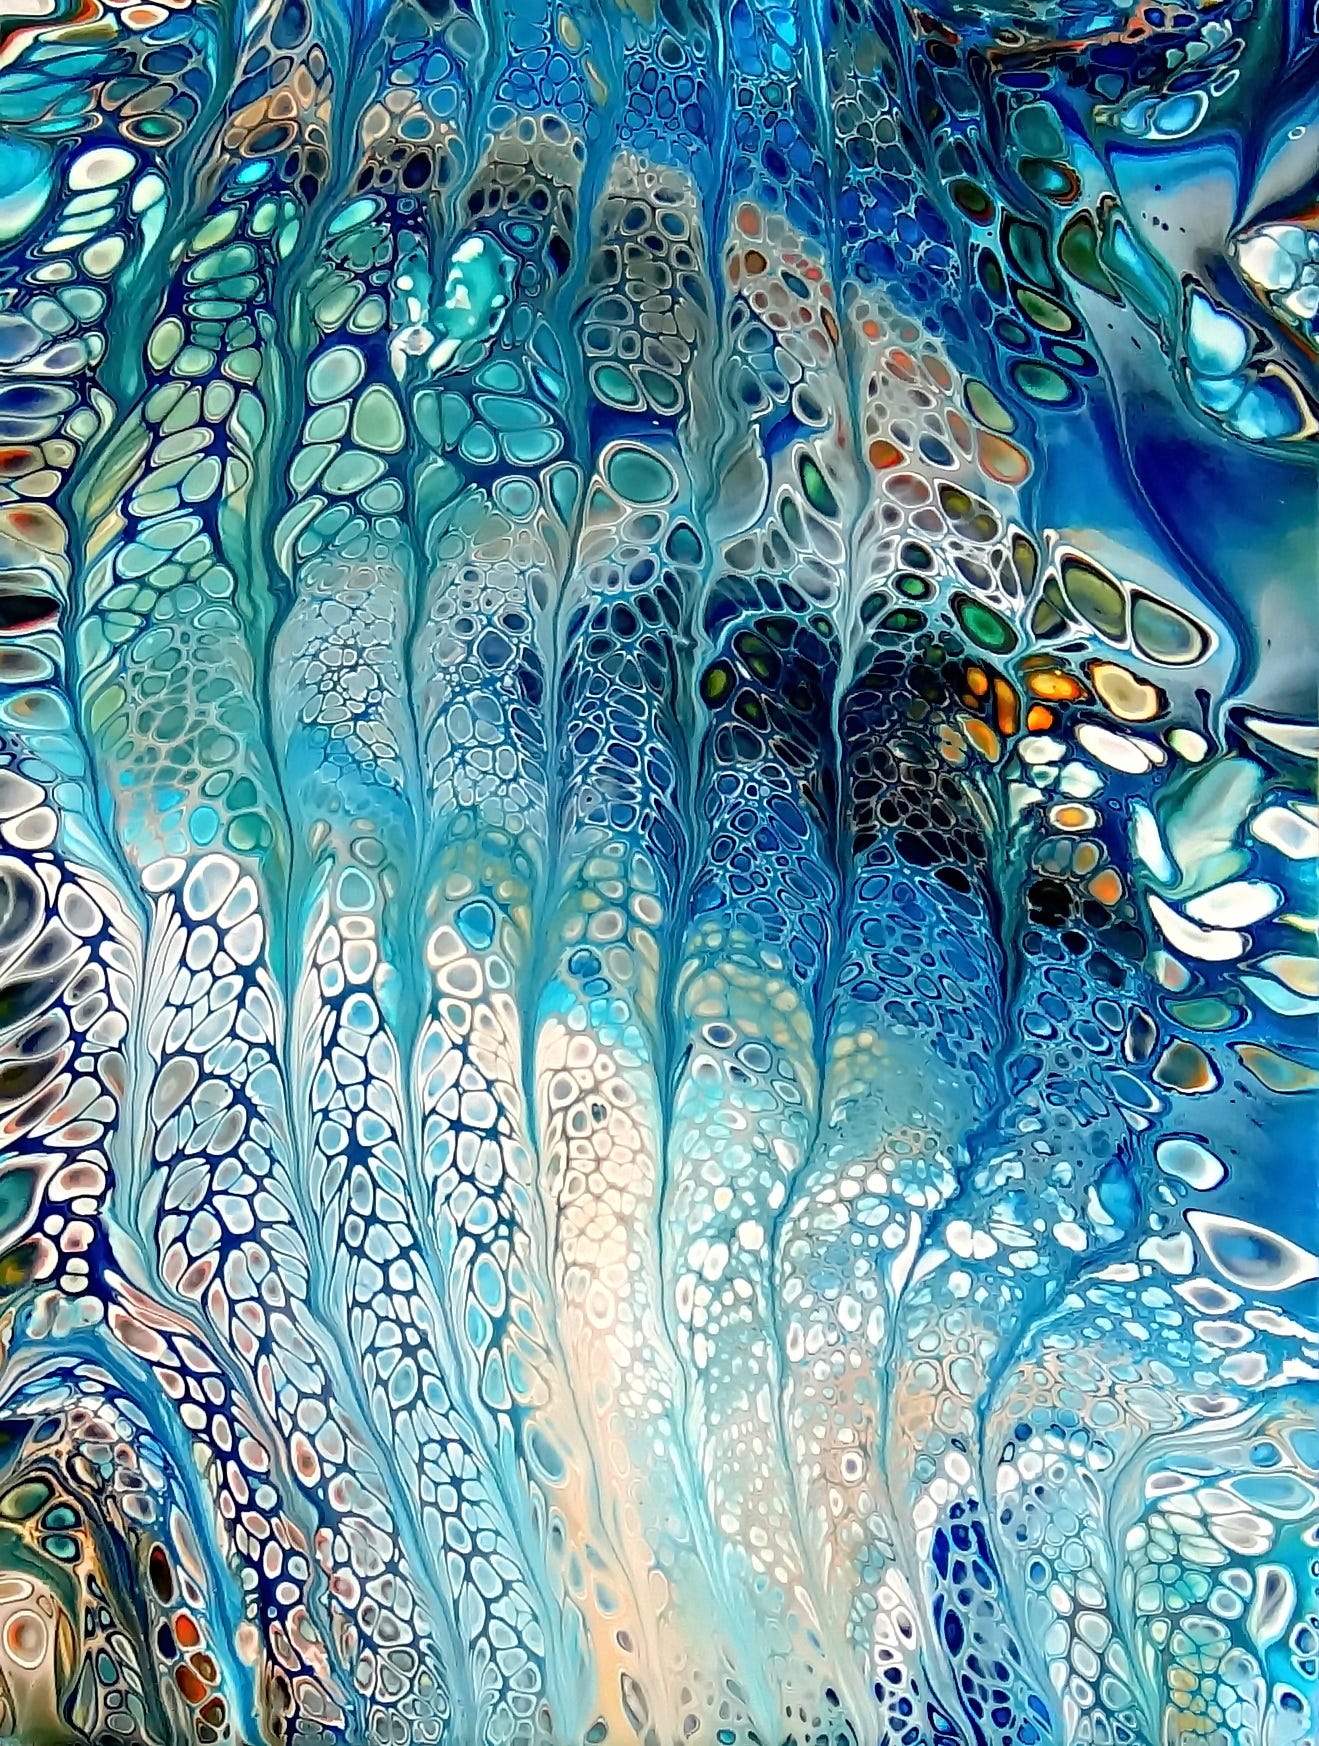 acrylic pouring for beginners: become an artist today